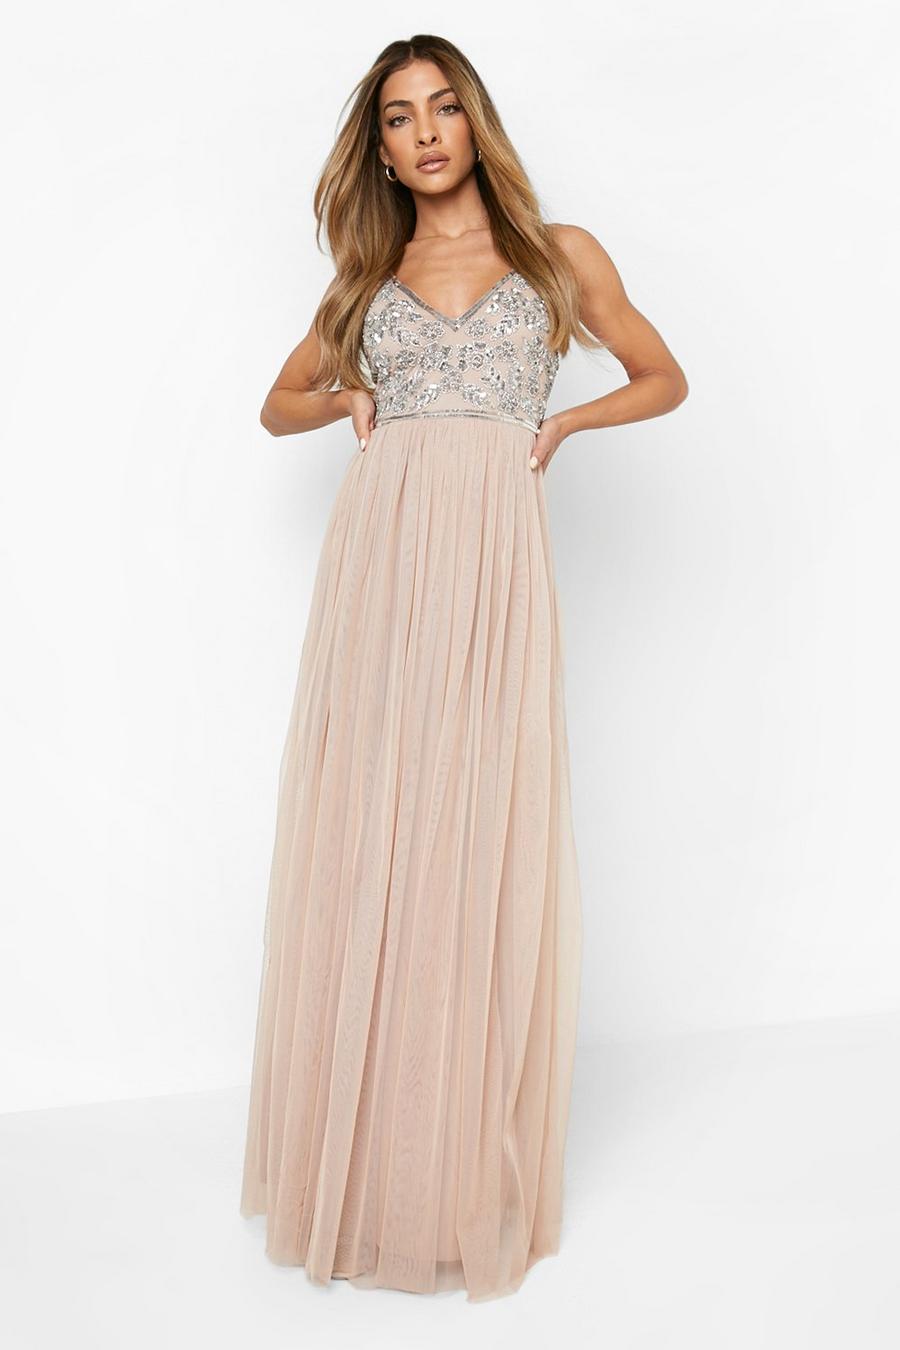 Nude Bridesmaid Hand Embellished Strappy Maxi